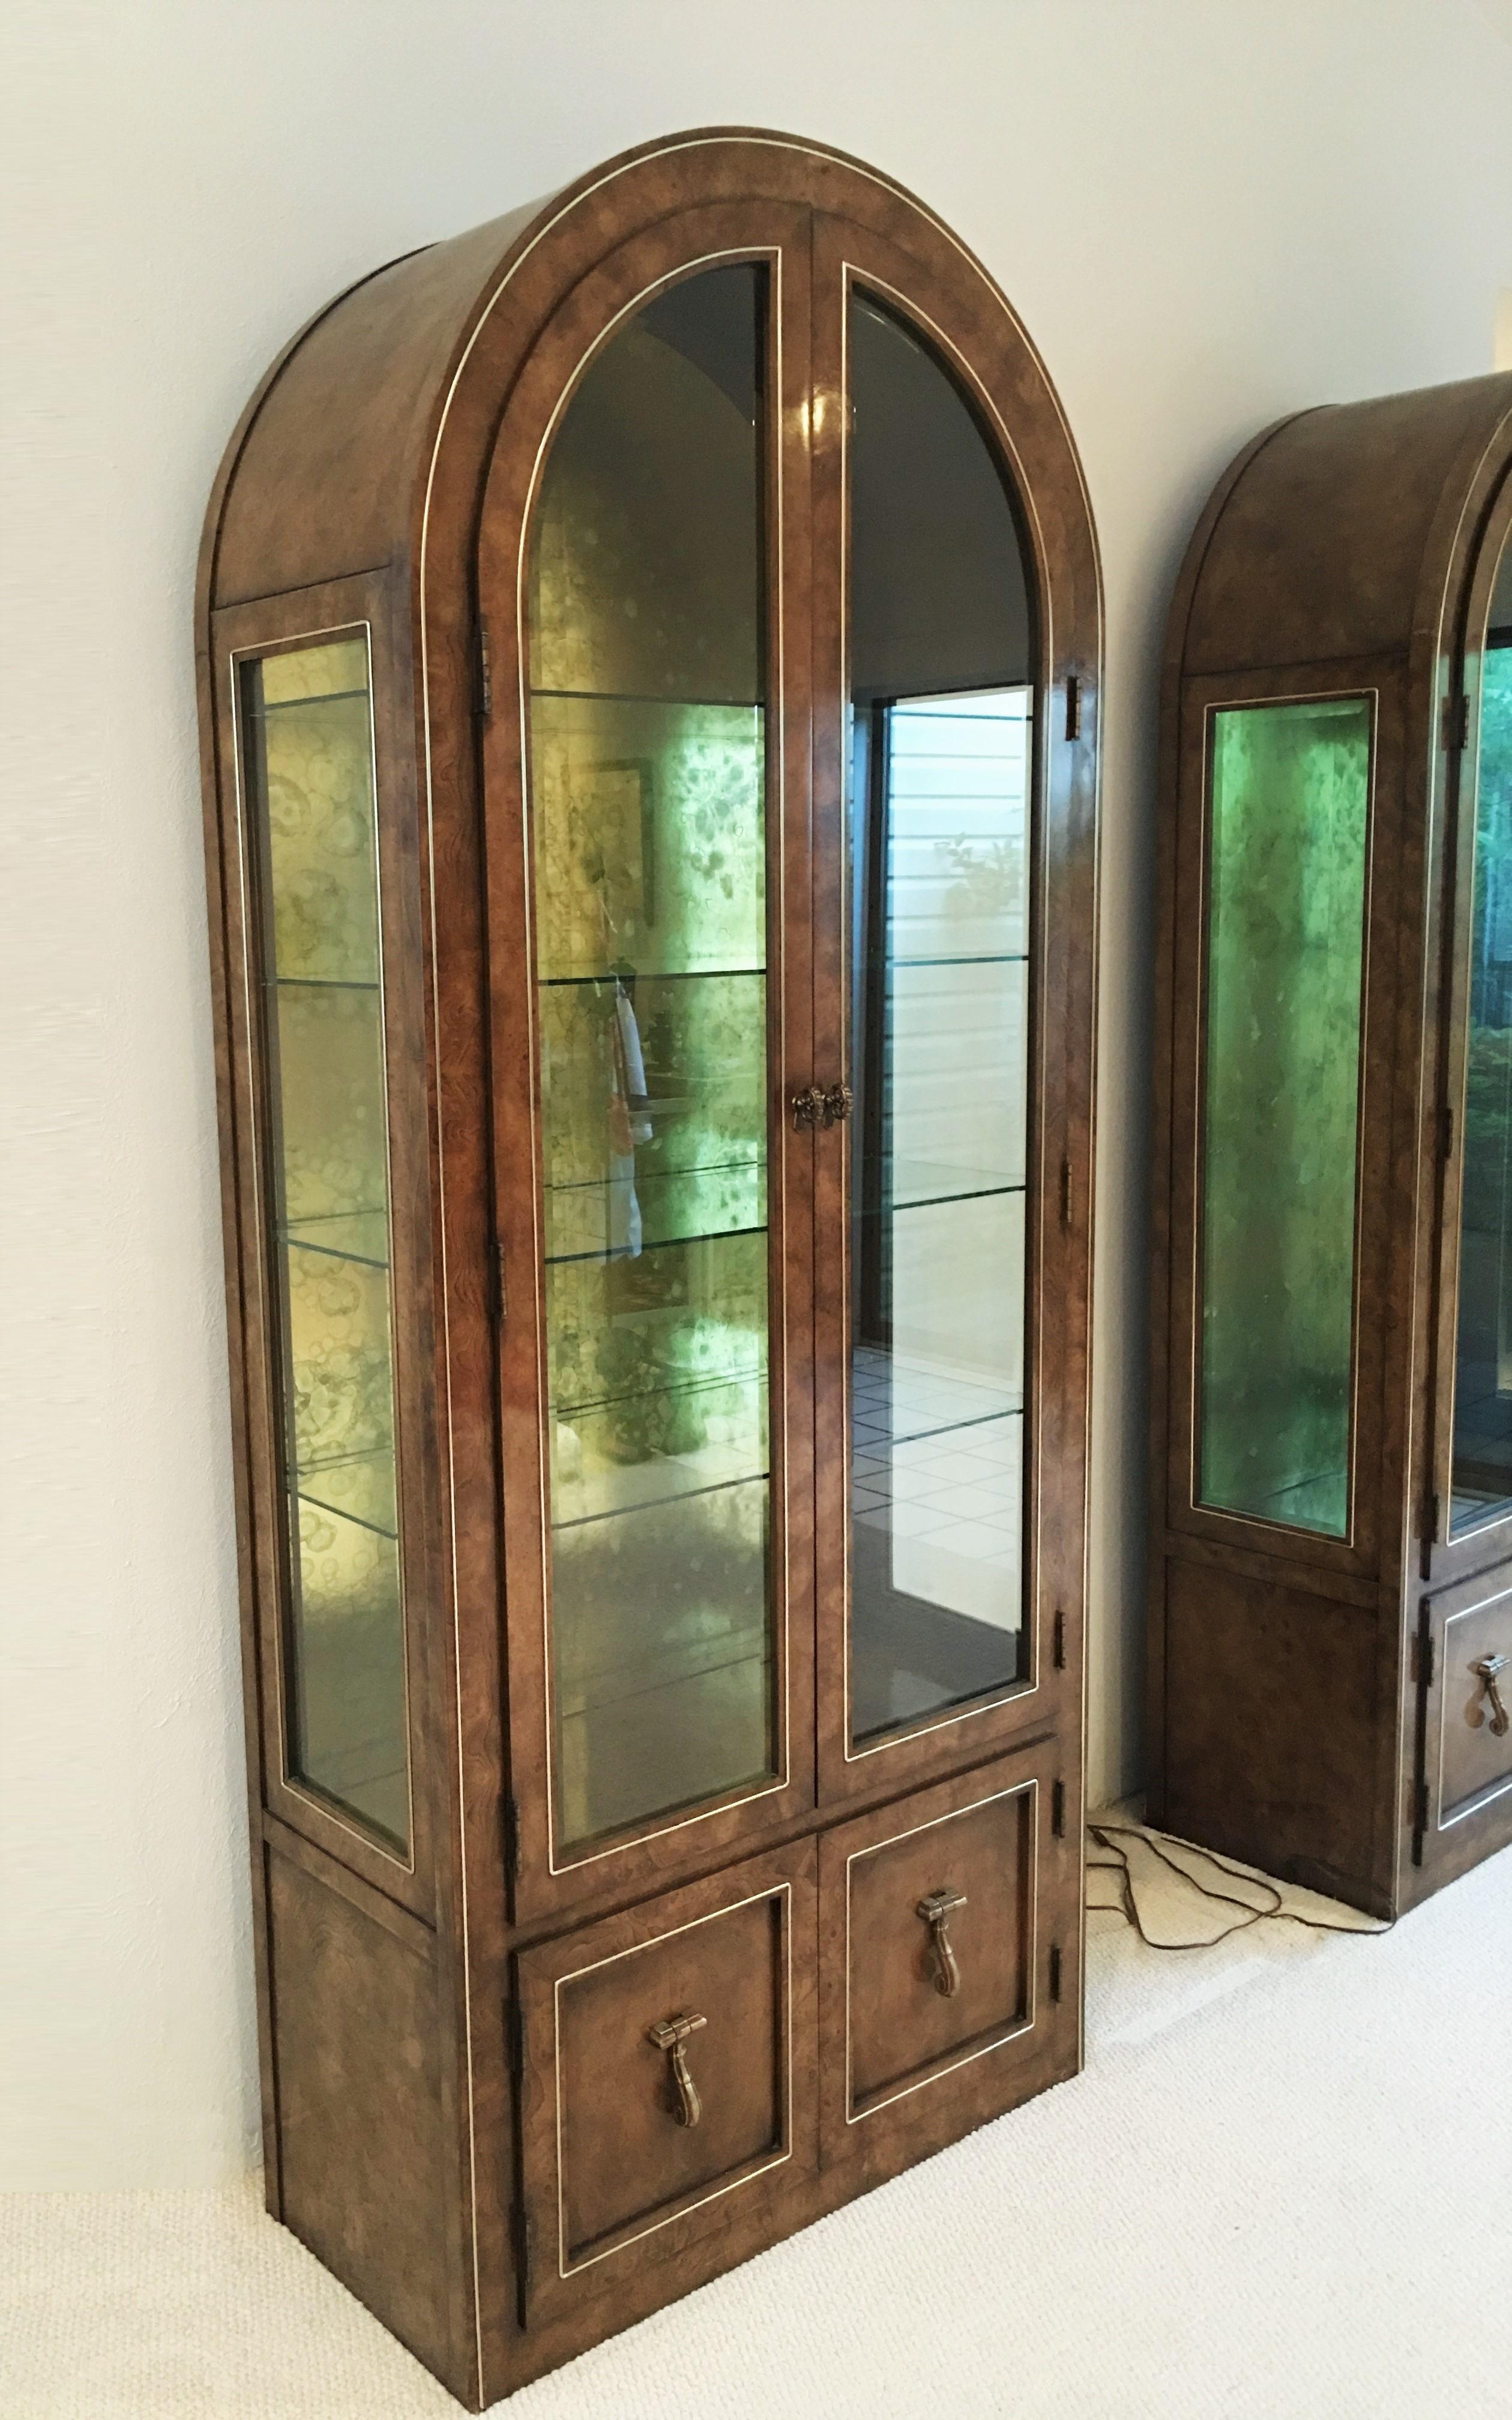 Eye-catching burled Amboyna wood and brass vitrine cabinets by William Doezema for Mastercraft. Set includes two free standing vitrines; large round-top burl wood cabinets each with four interior glass shelves, Featuring beveled front and side glass